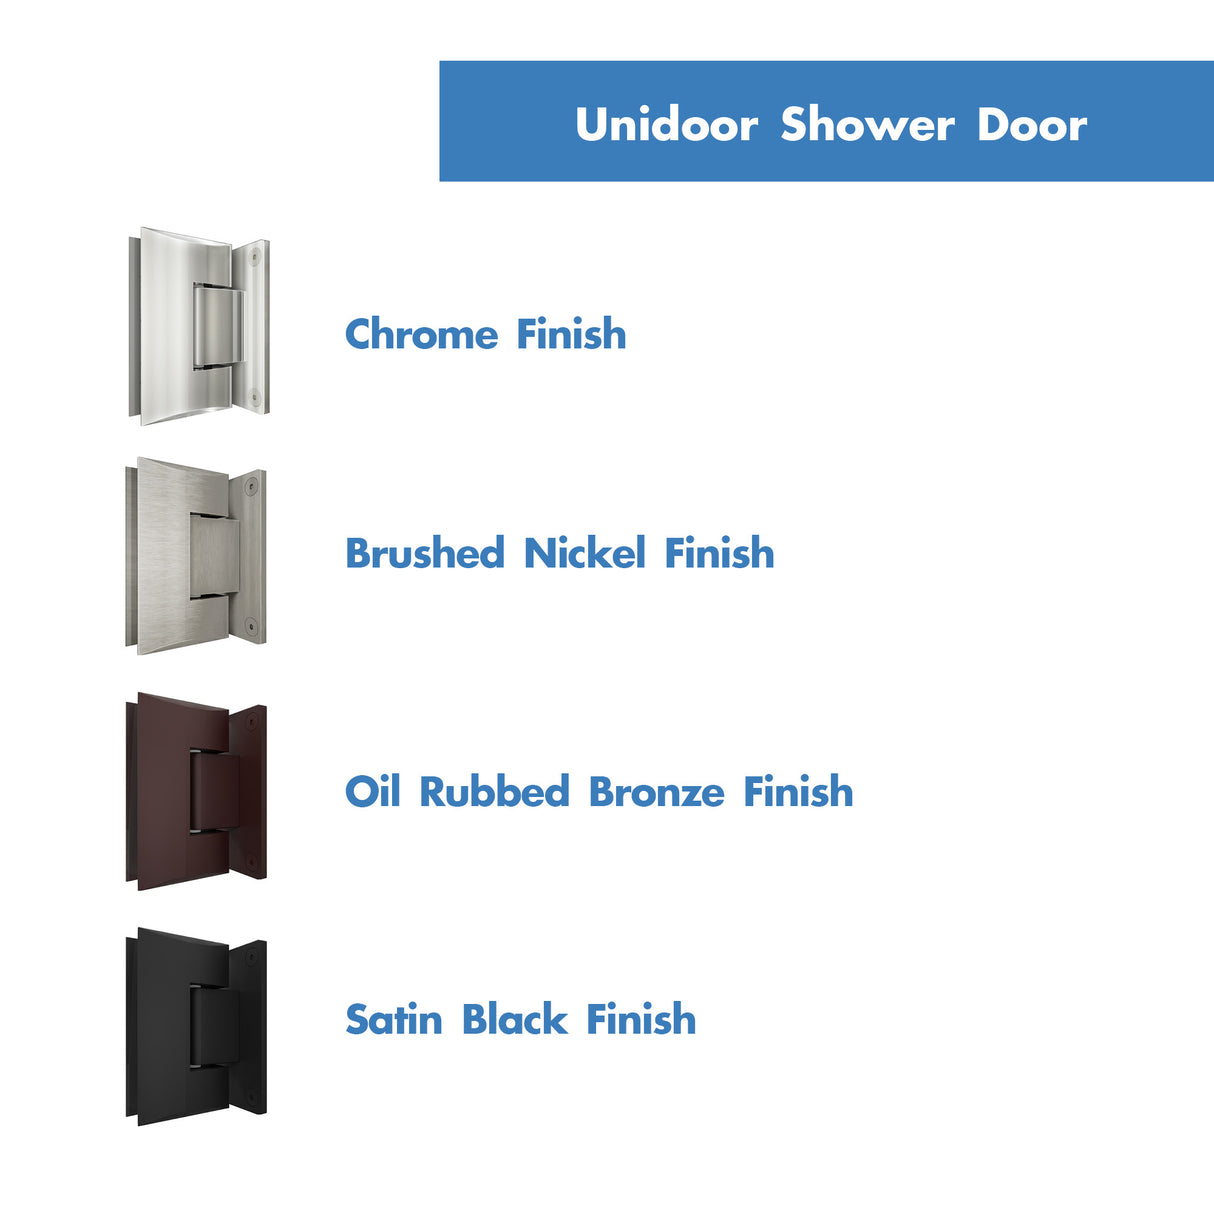 DreamLine Unidoor 51-52 in. W x 72 in. H Frameless Hinged Shower Door with Support Arm in Chrome